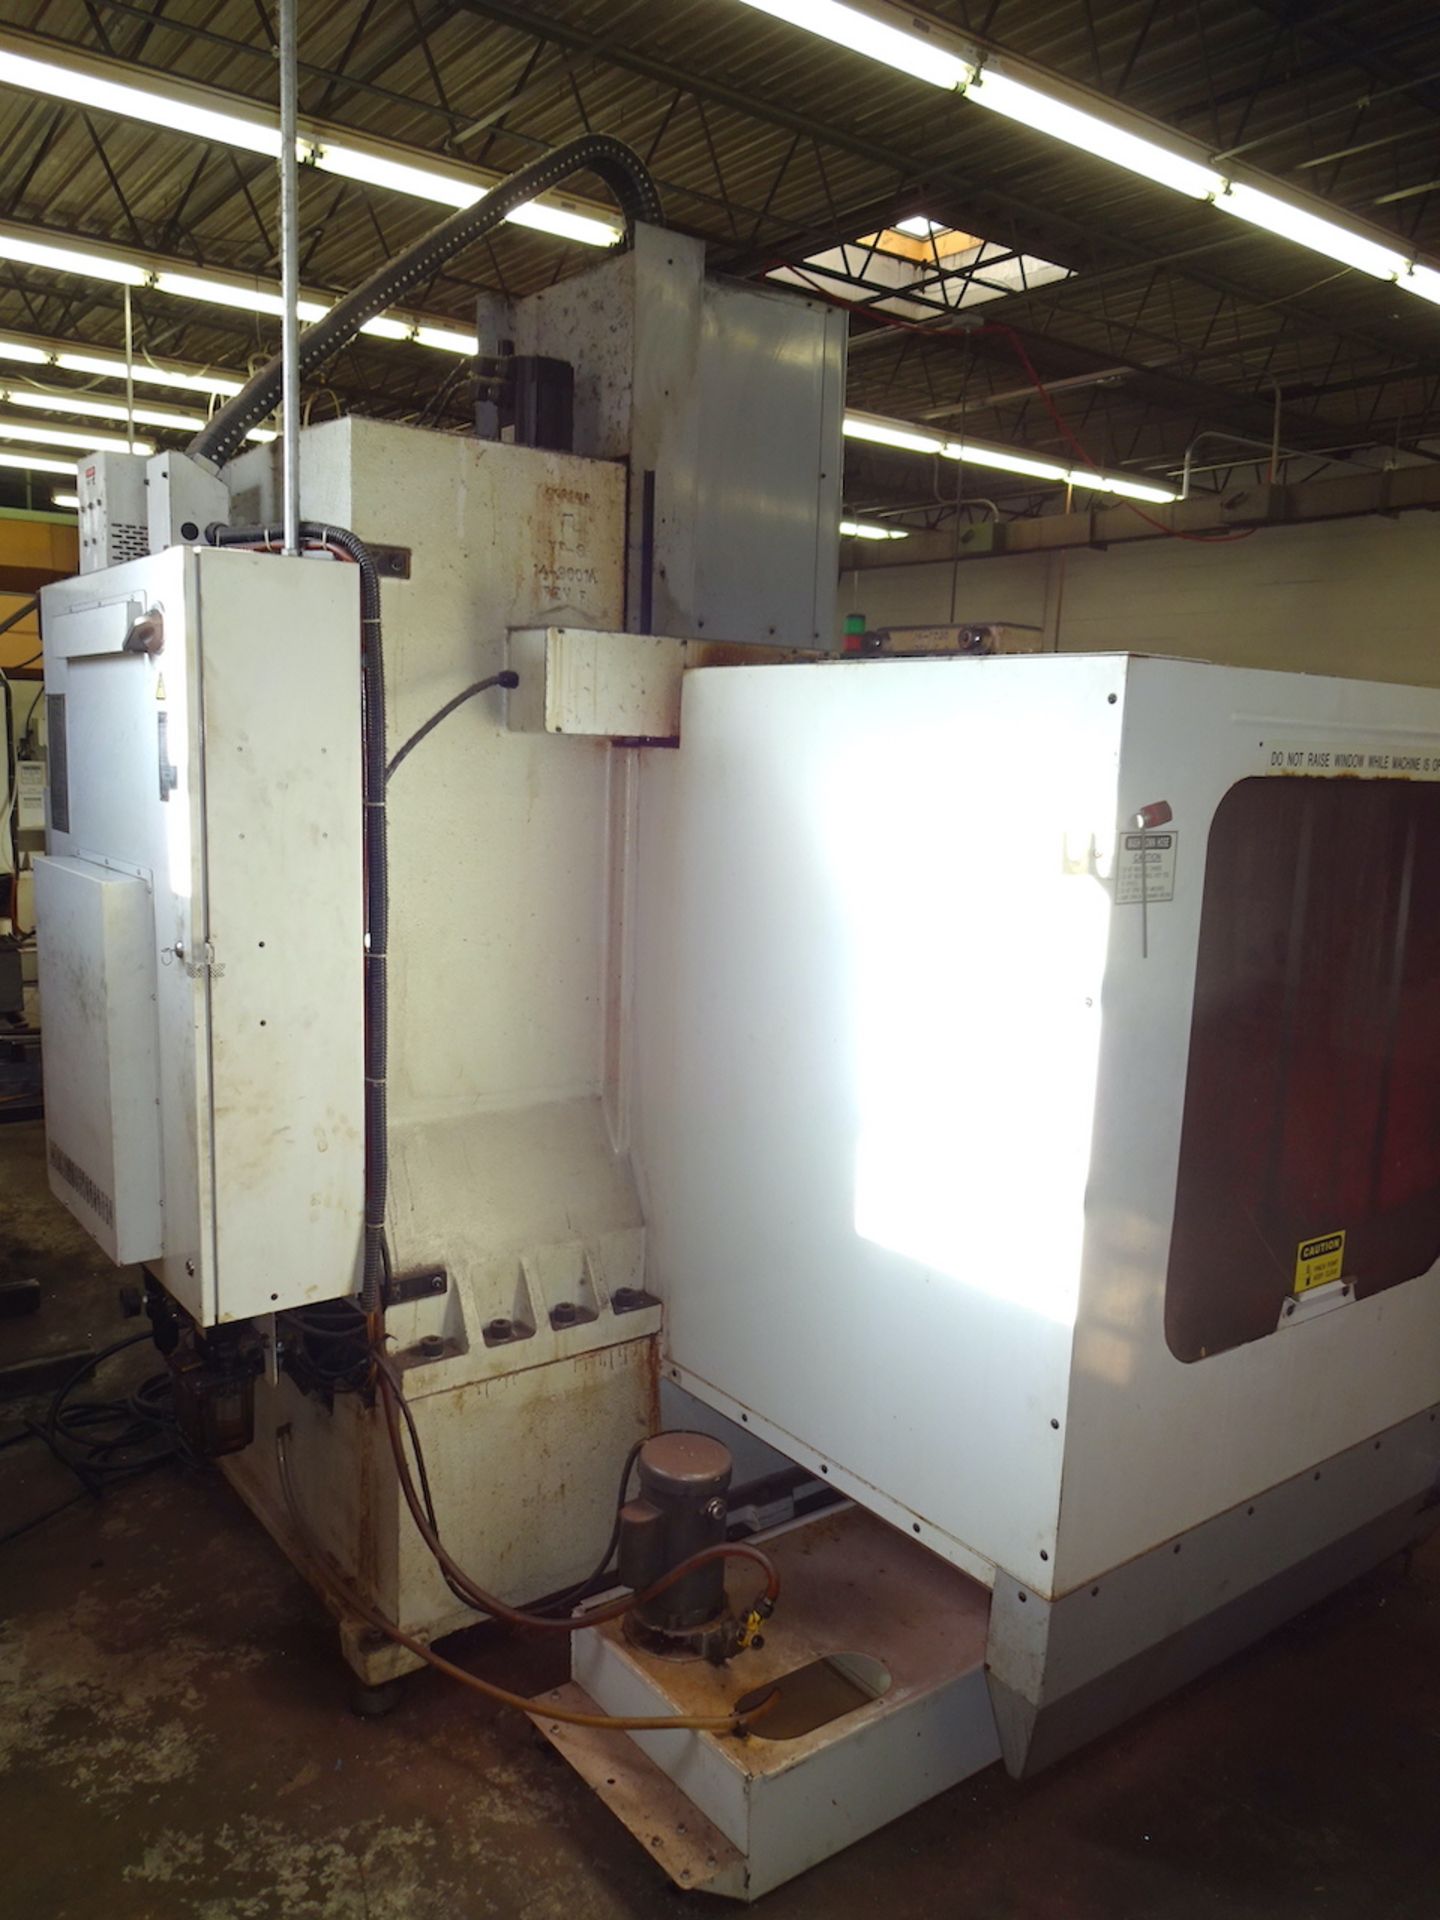 1998 Haas Model VF-4 CNC Vertical Machining Center, S/N 14860, 20 HP Vector Drive, 710 IPM Brushless - Image 13 of 13